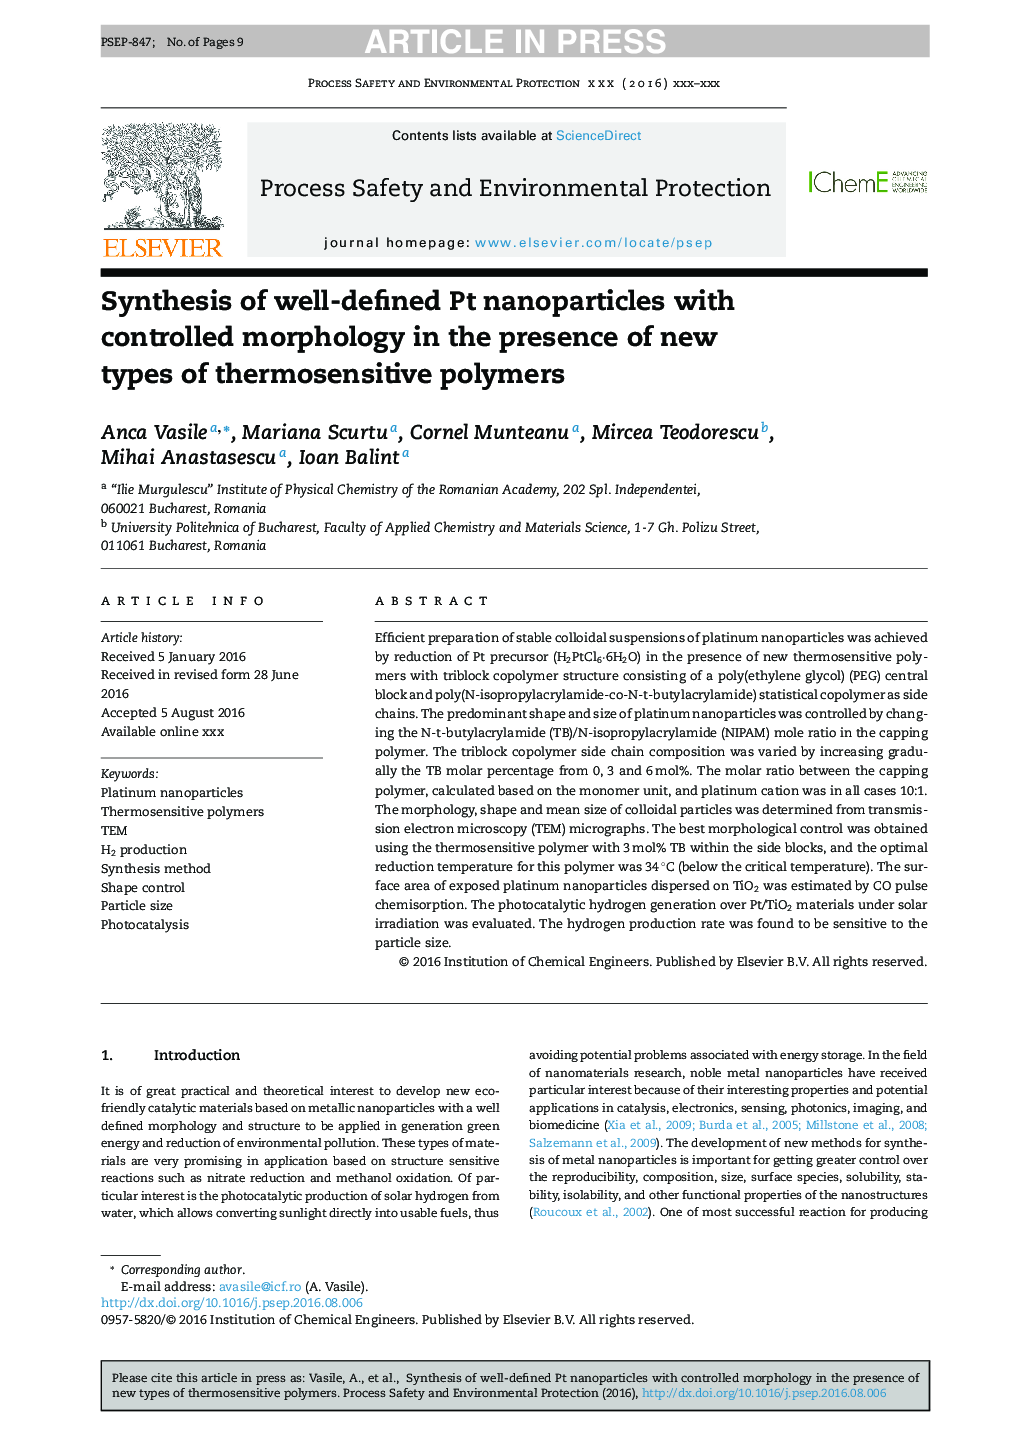 Synthesis of well-defined Pt nanoparticles with controlled morphology in the presence of new types of thermosensitive polymers